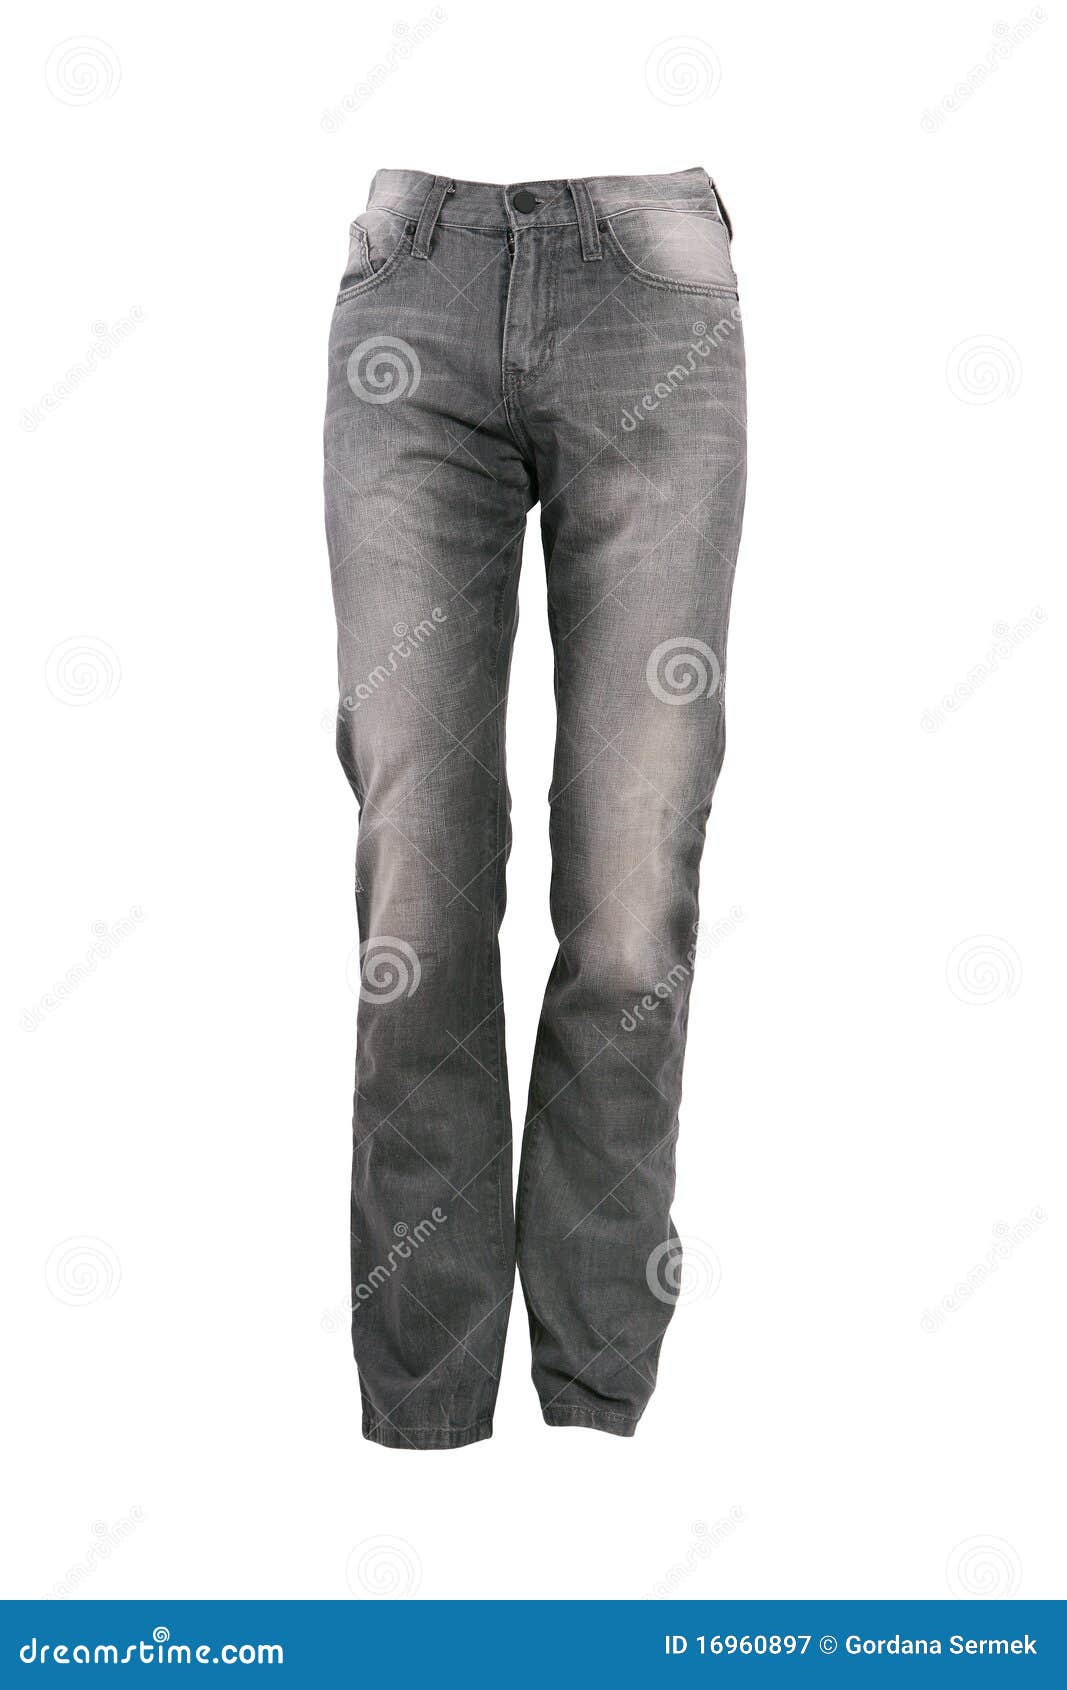 Greay jeans trousers stock image. Image of clothing, male - 16960897